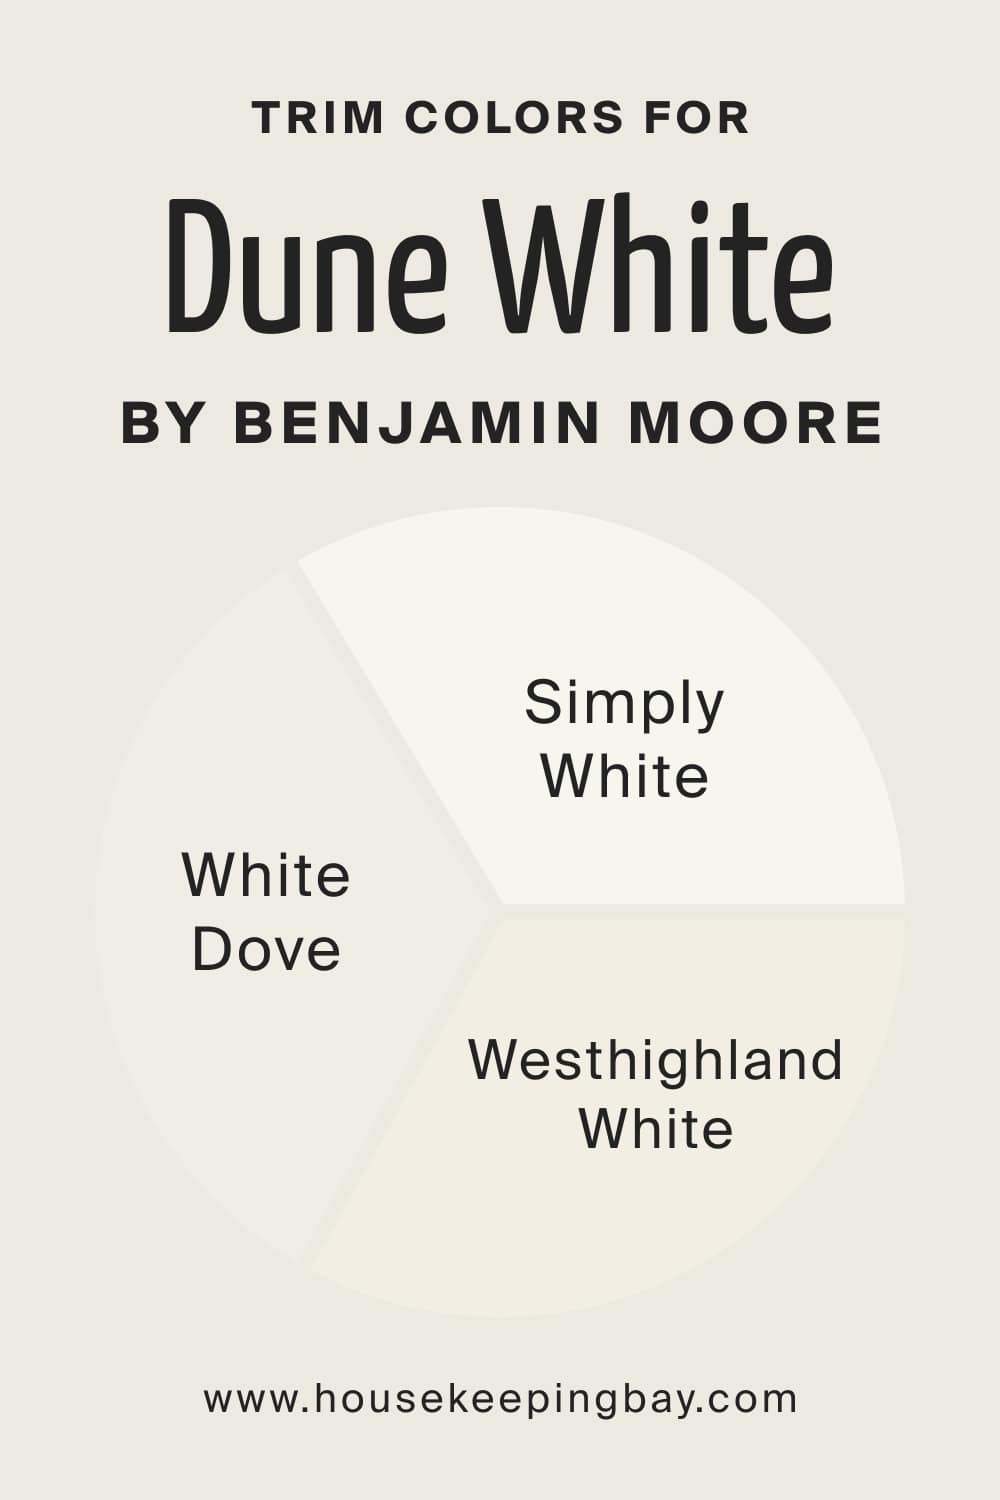 Trim Colors for Dune White 968 by Benjamin Moore